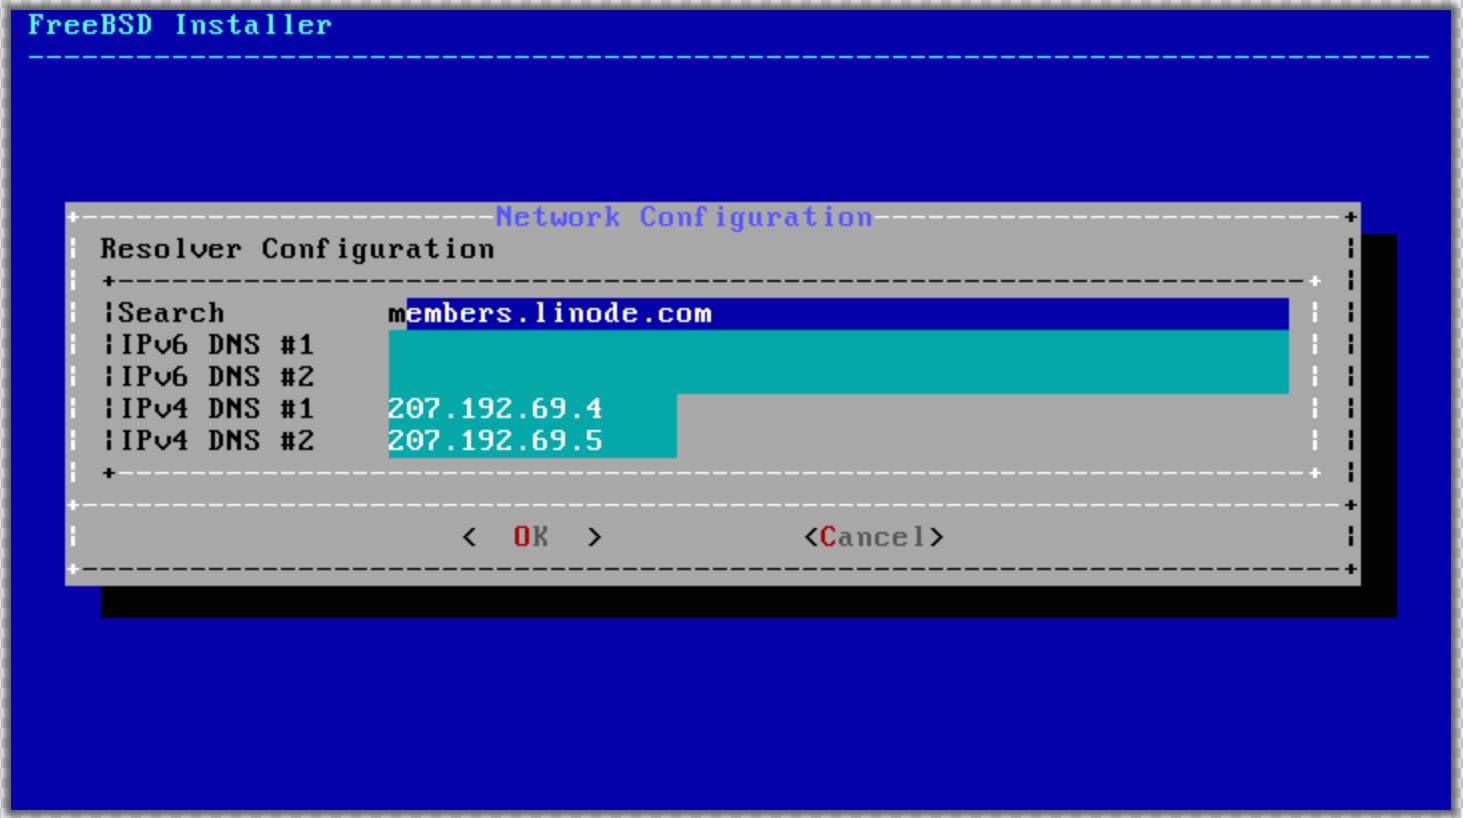 FreeBSD network configuration